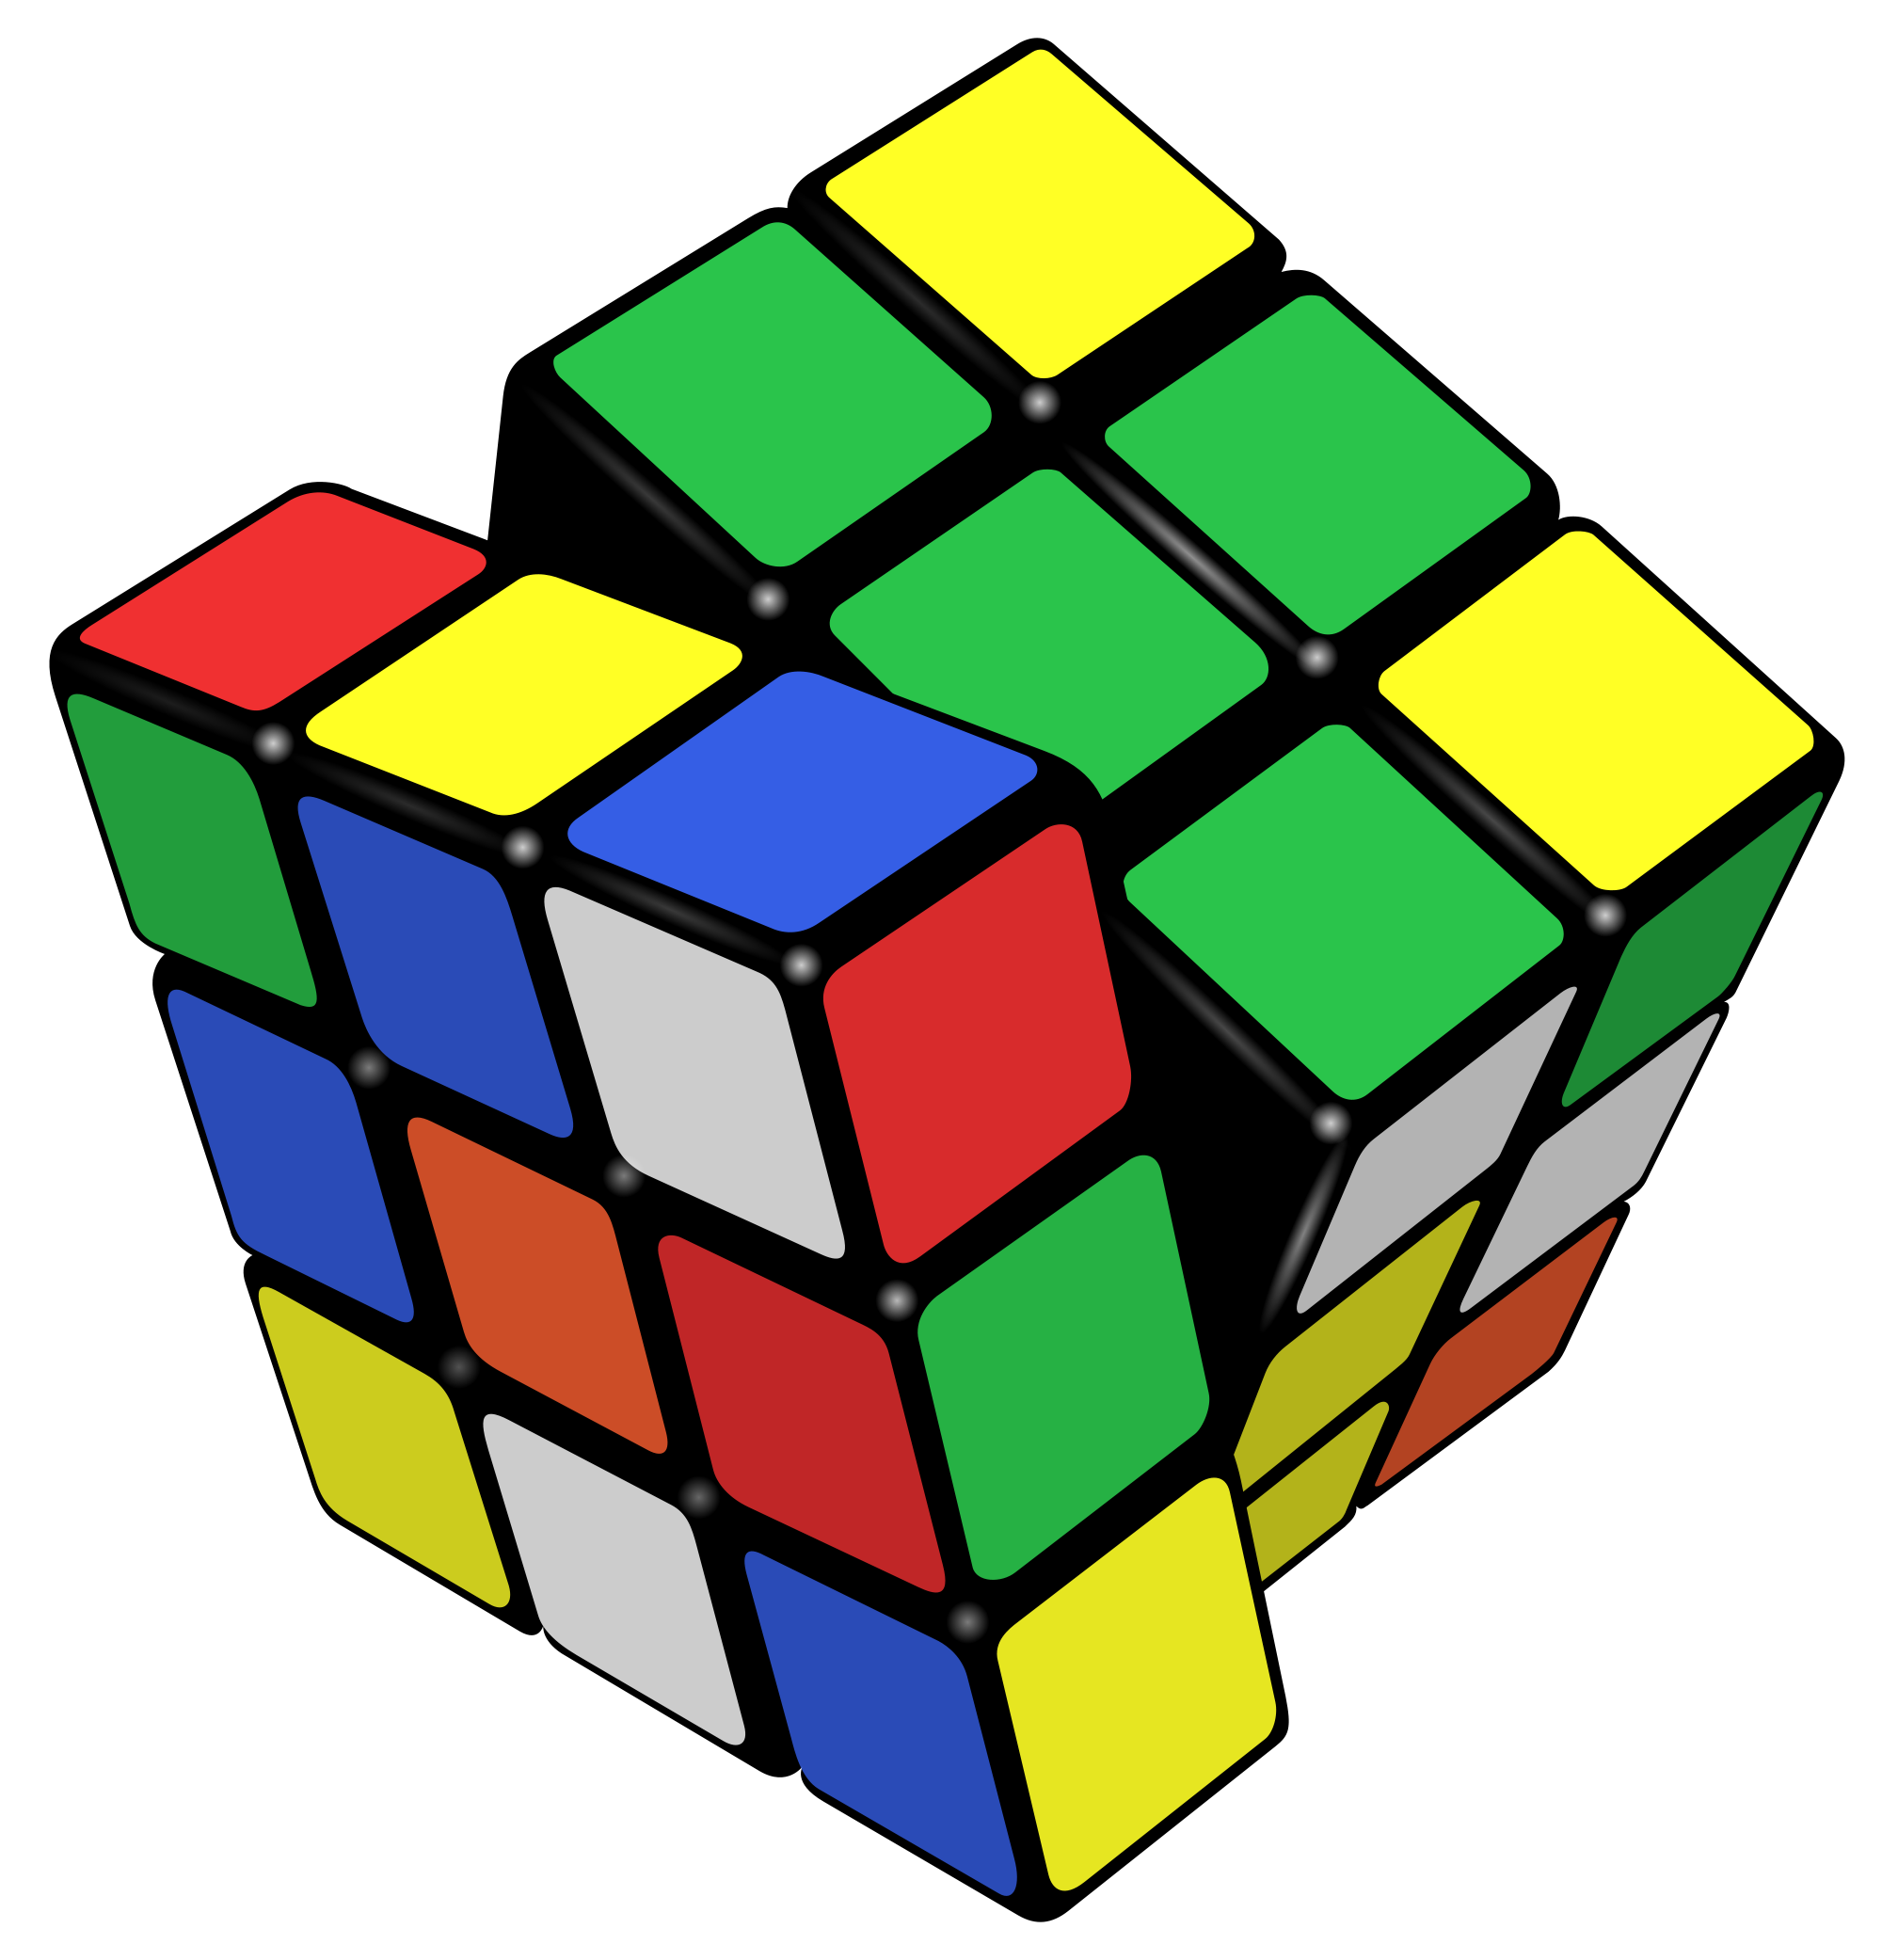 cube clipart 80s party